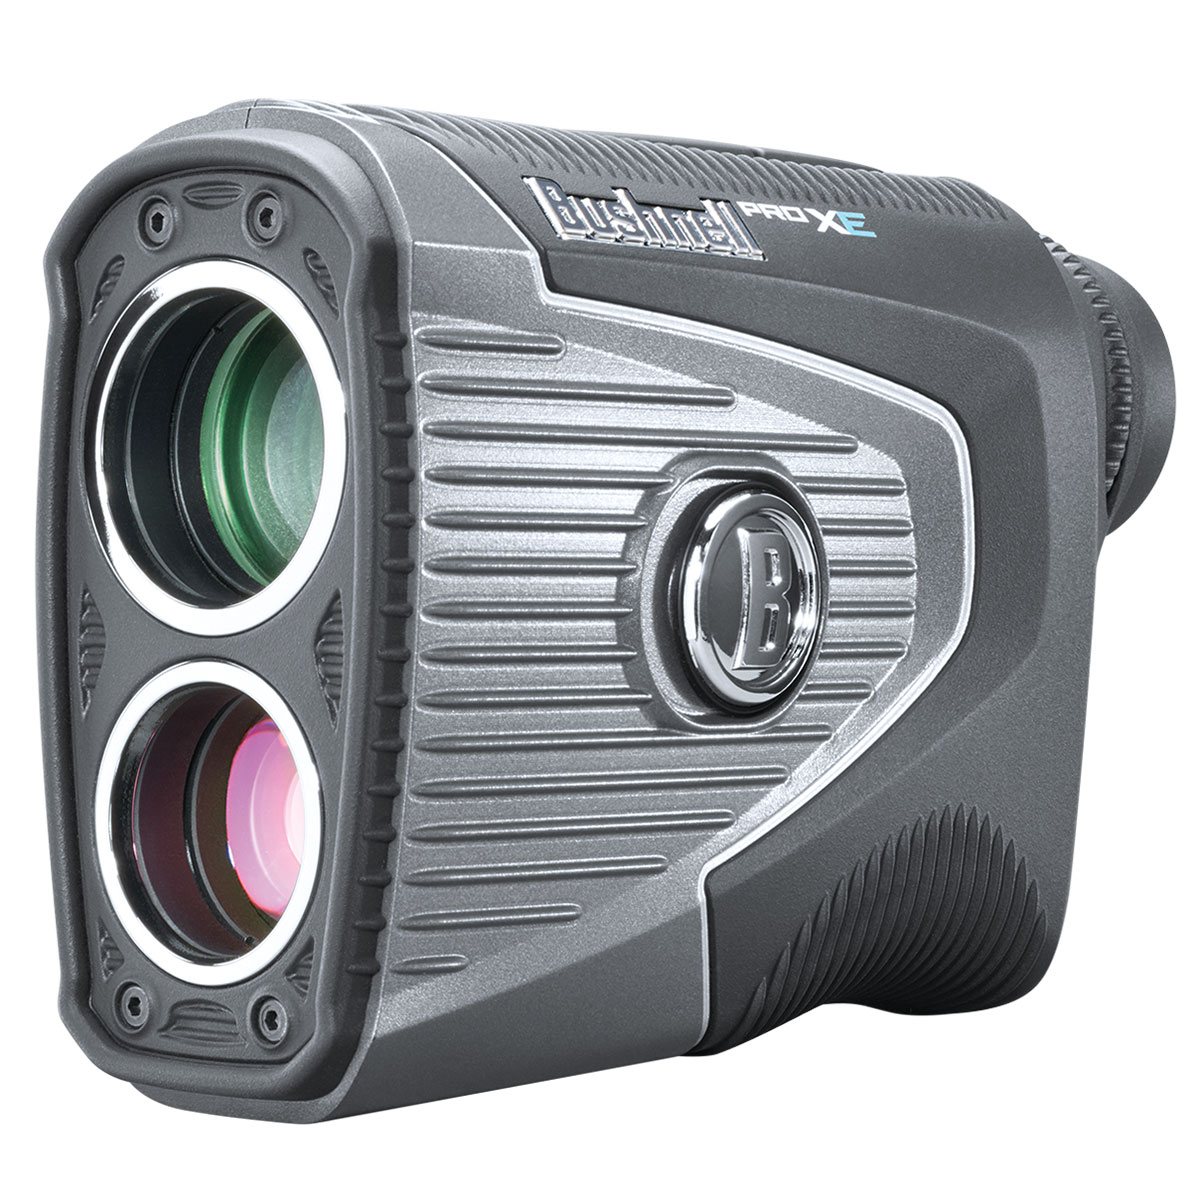 Drivers Bushnell